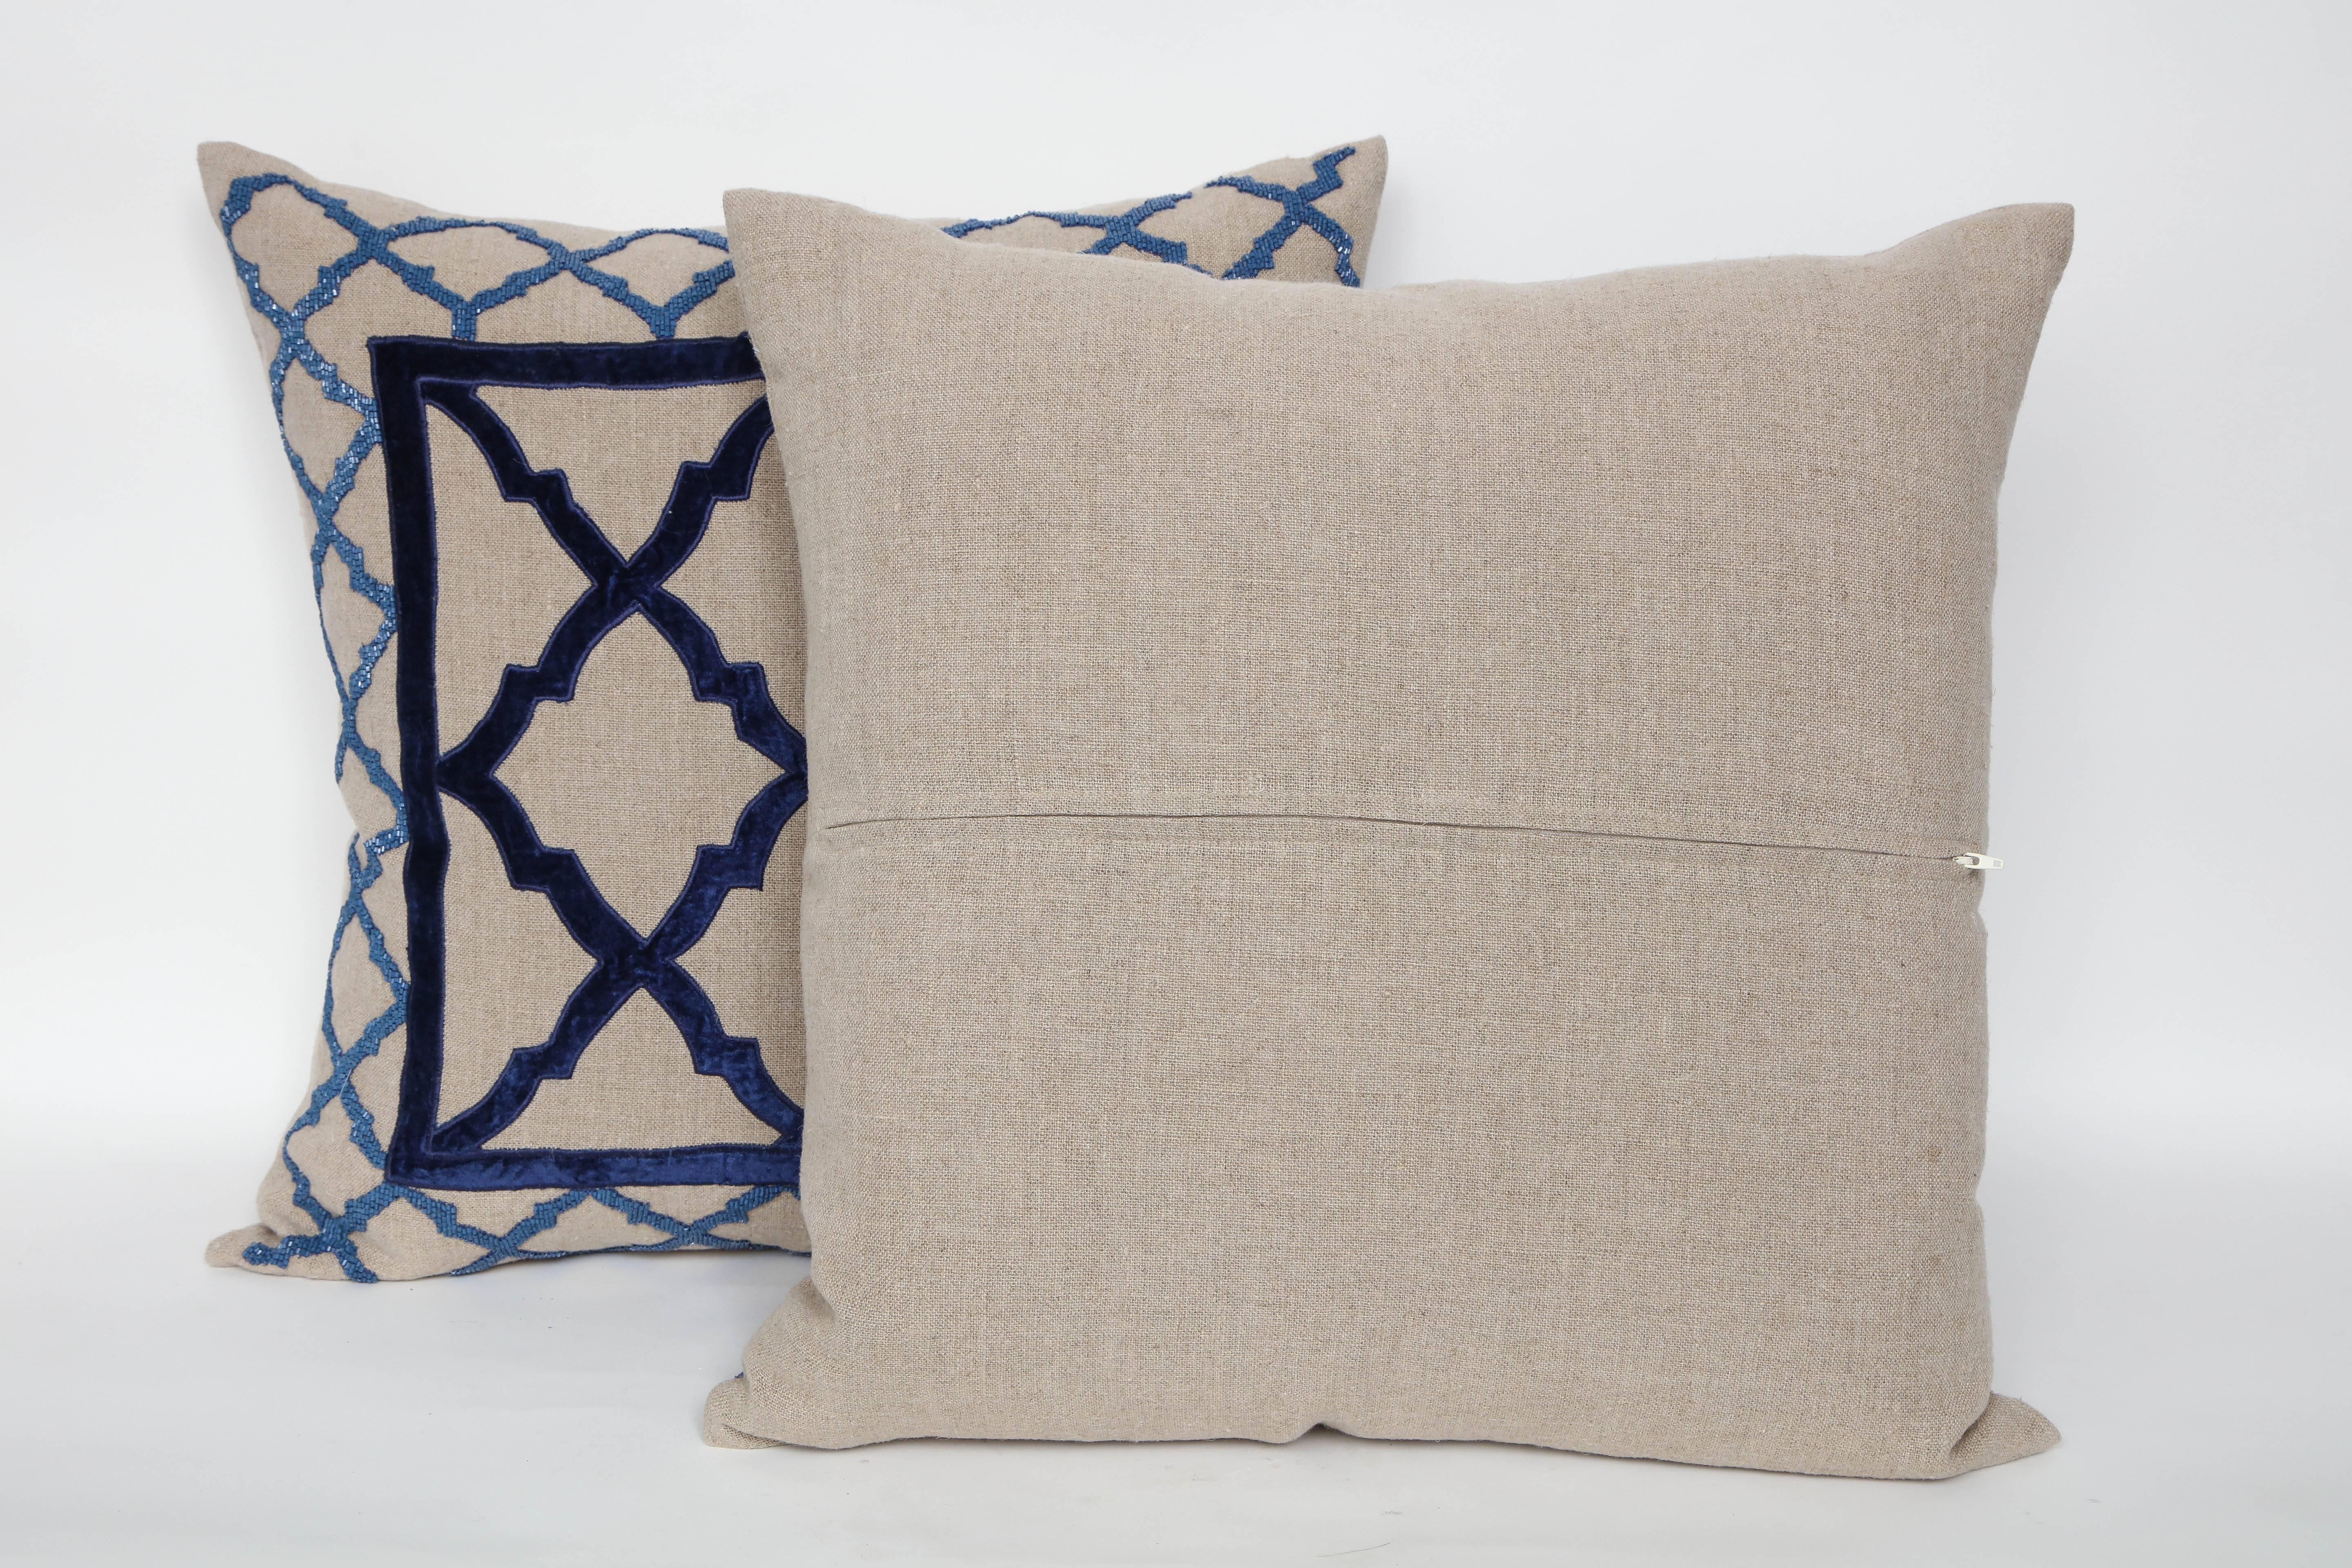 Striking pair of heavy weight natural linen pillows trimmed with dark blue velvet trellis motif centres and light blue seed beaded borders, hidden zipper closure. Inserts are feather and down.